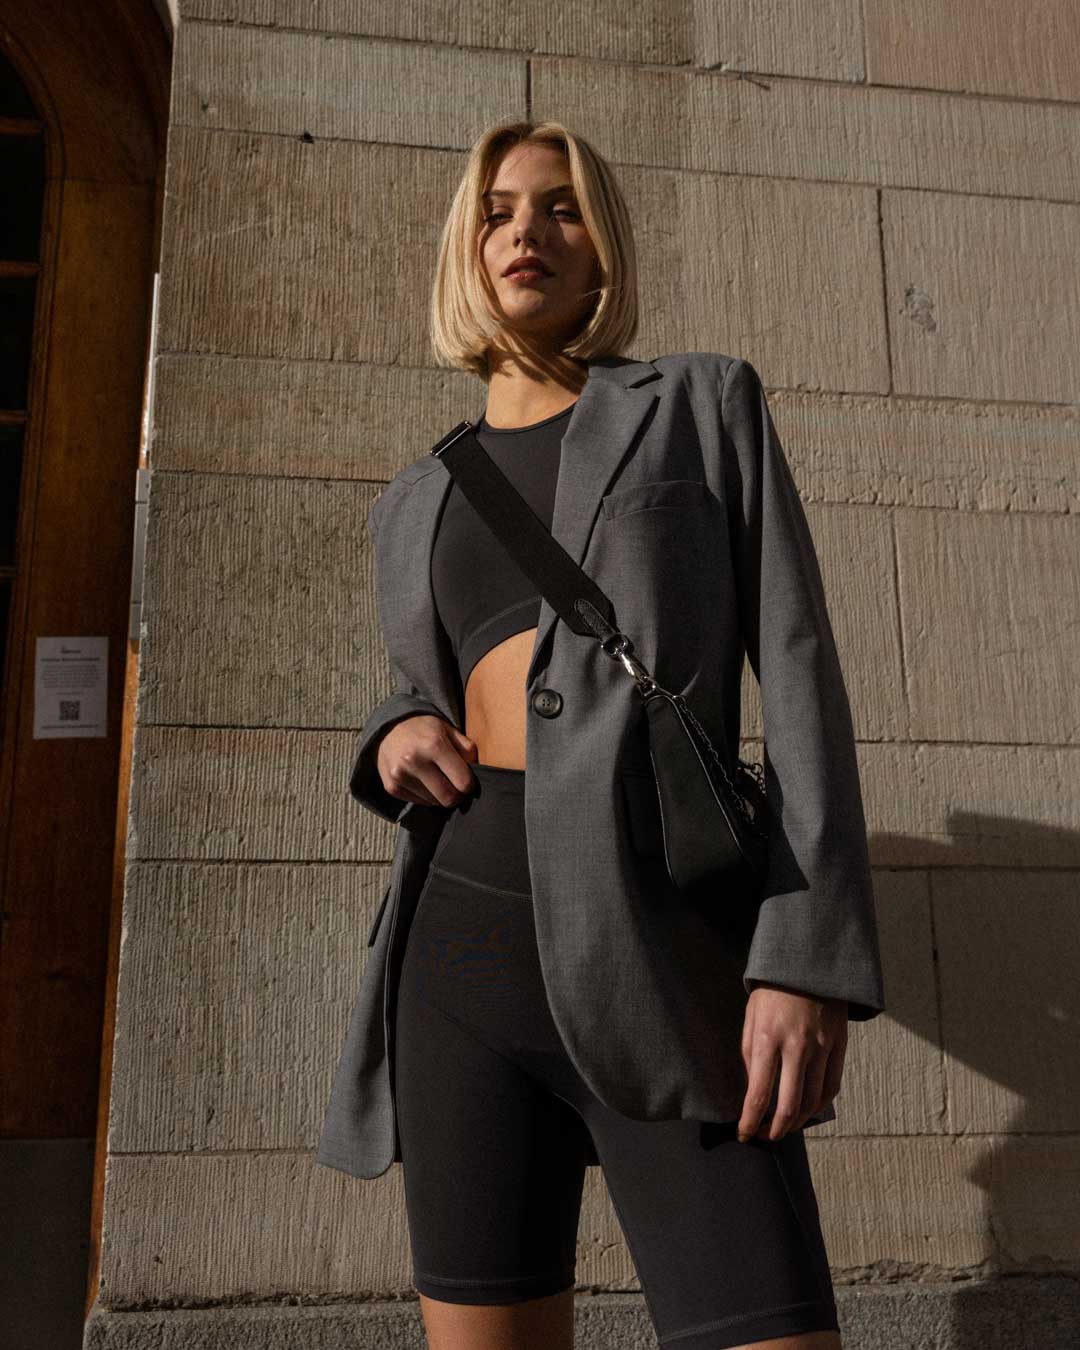 Blonde woman in biker shorts, suit jacket and handbag posing infront of a building